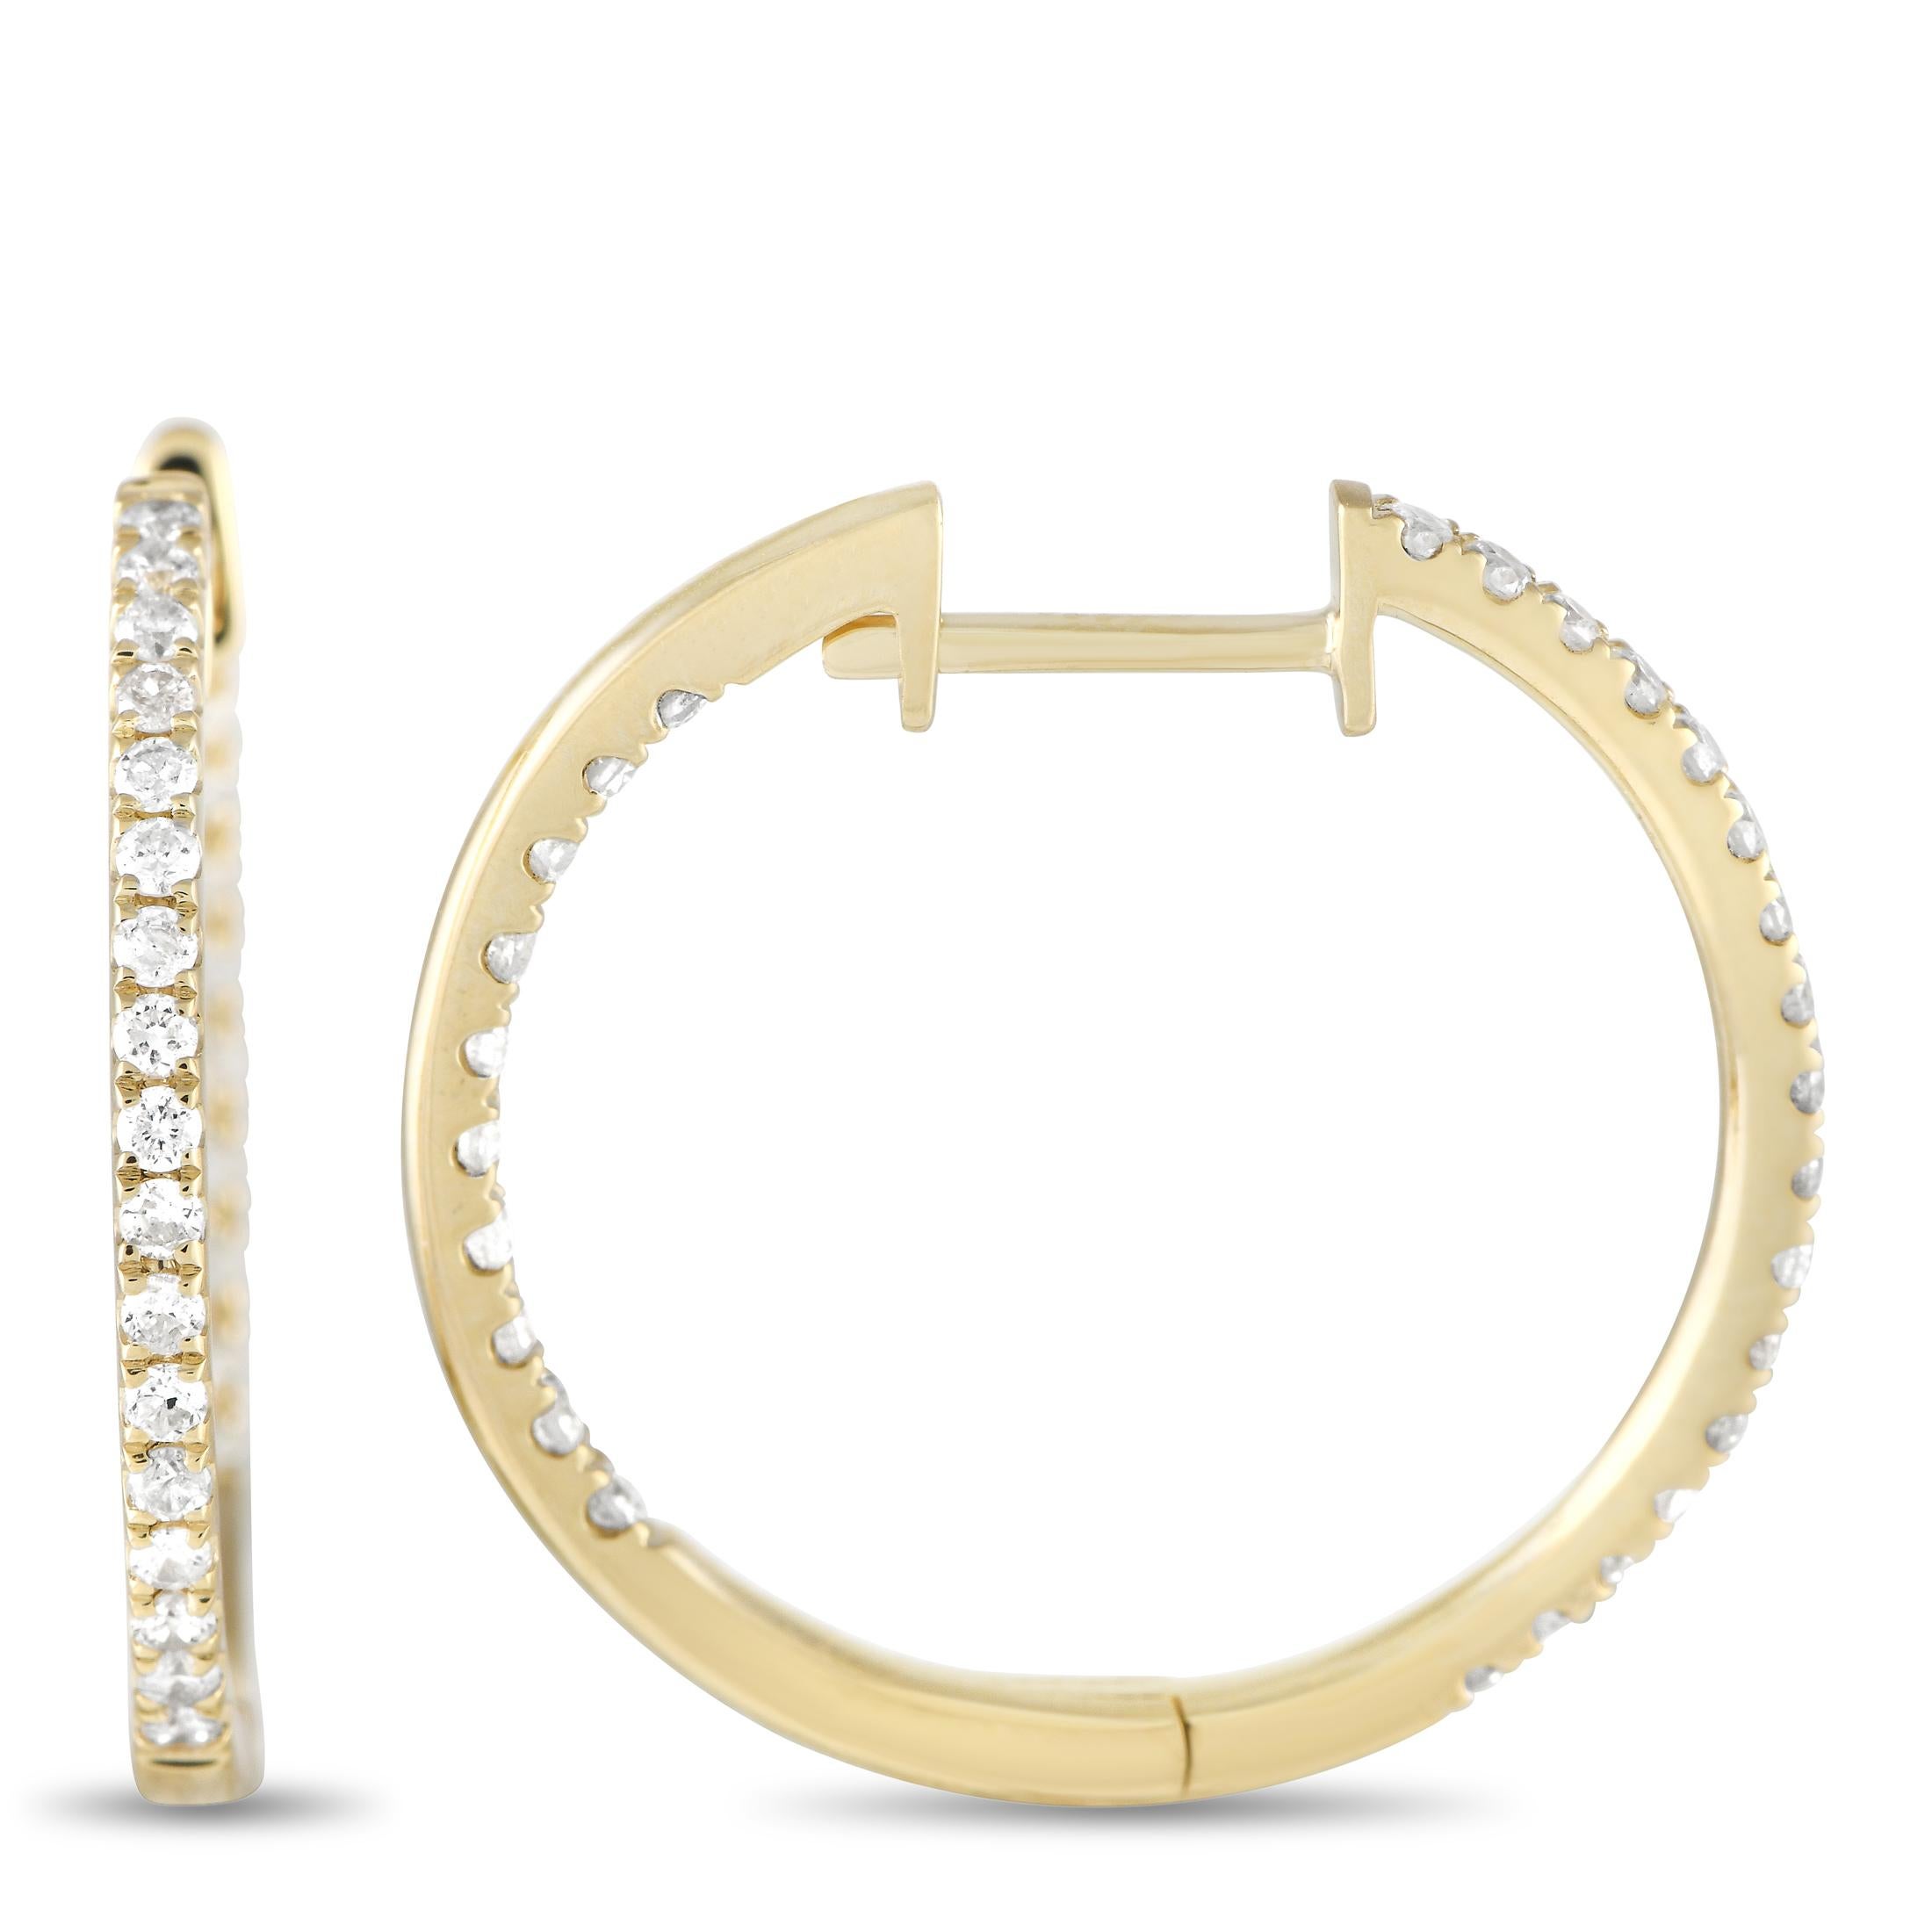 These dazzling hoop earrings are poised to put the perfect finishing touch on any ensemble. Diamonds with a total weight of 0.50 carats sparkle on seemingly every inch of these elegant earrings. Each one features a 14K Yellow Gold setting and